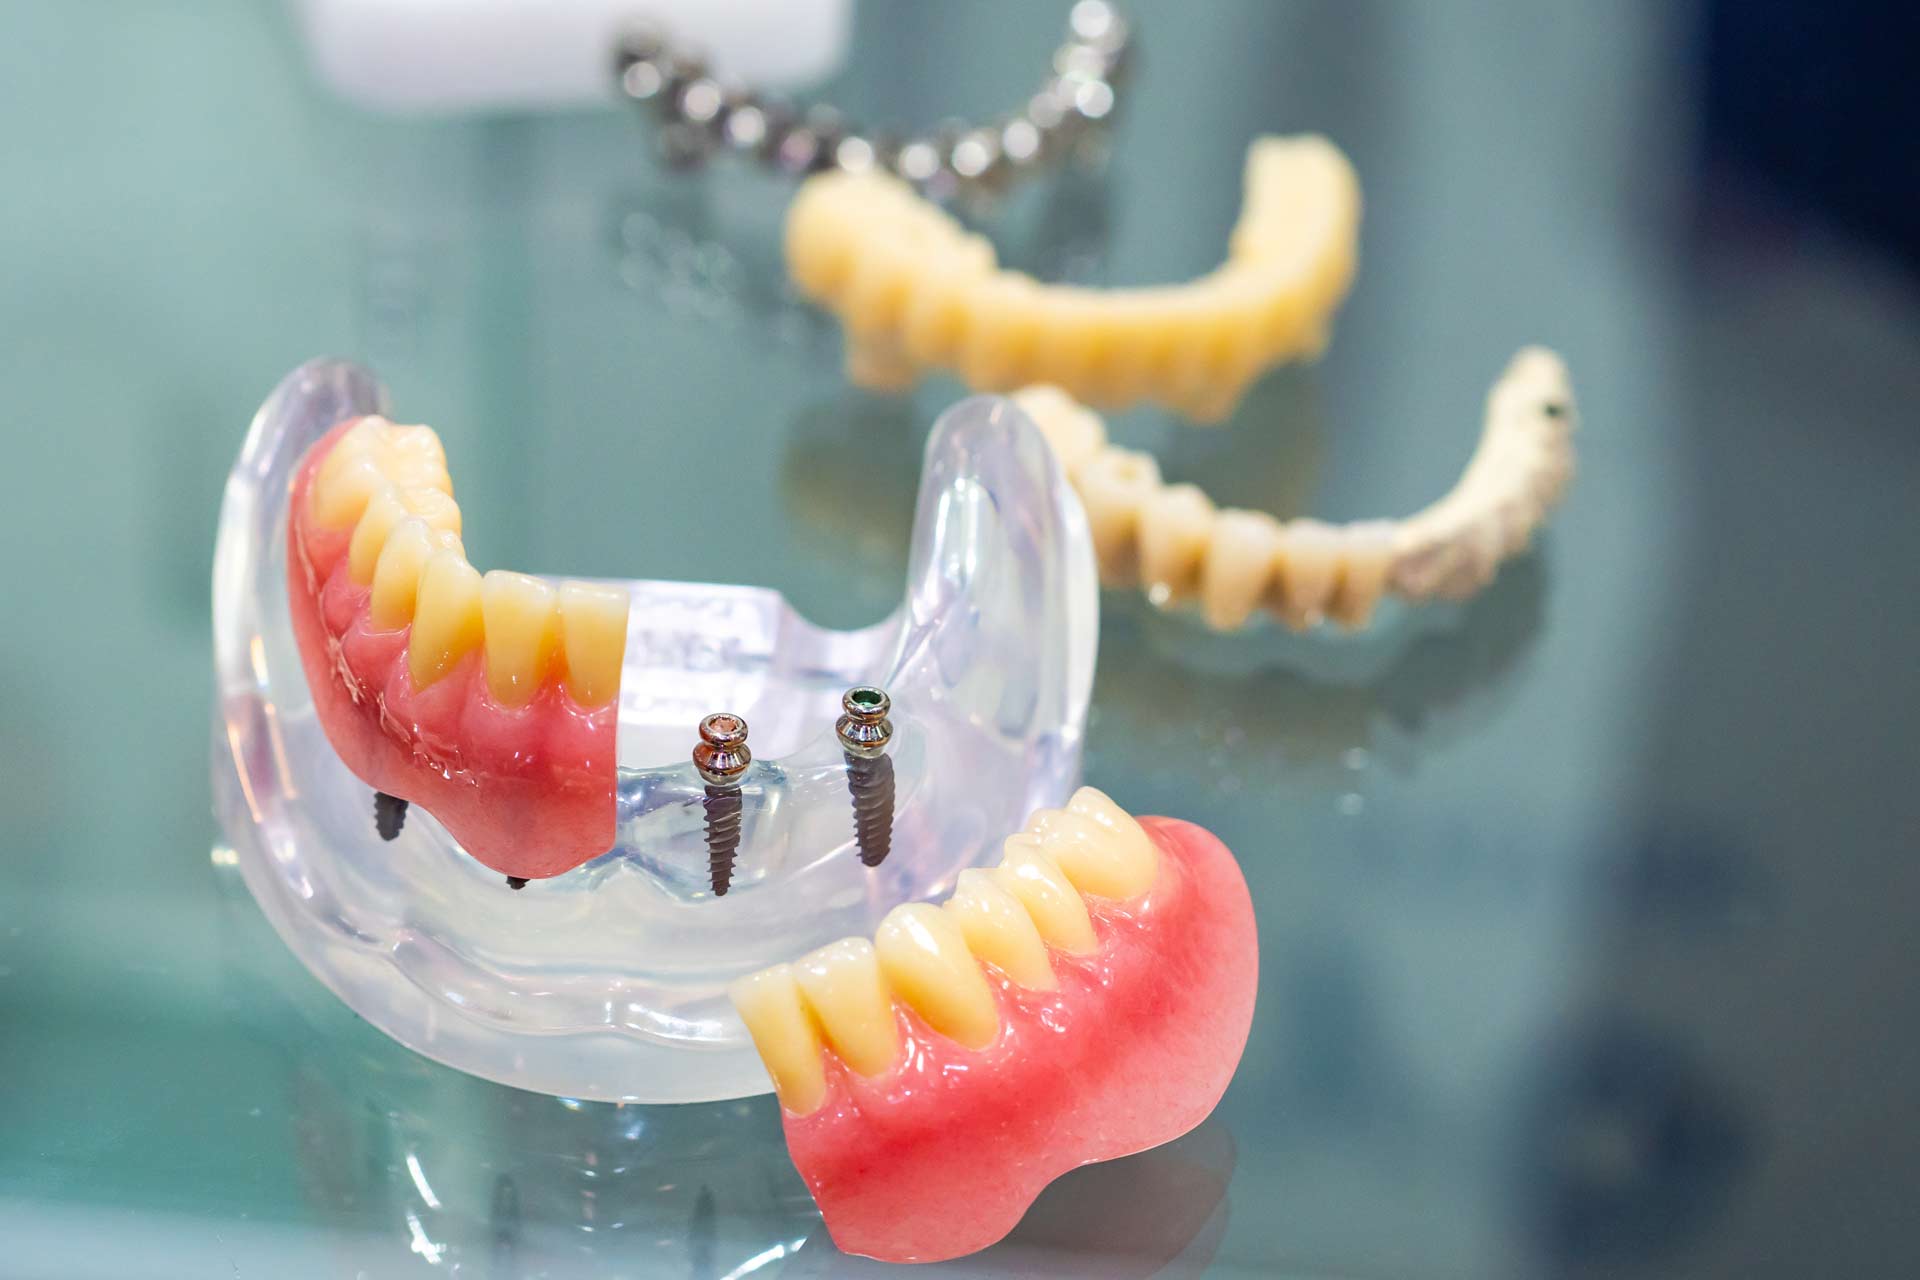 Dentures on Mini-Implants: The Ultimate in Denture Stabilization